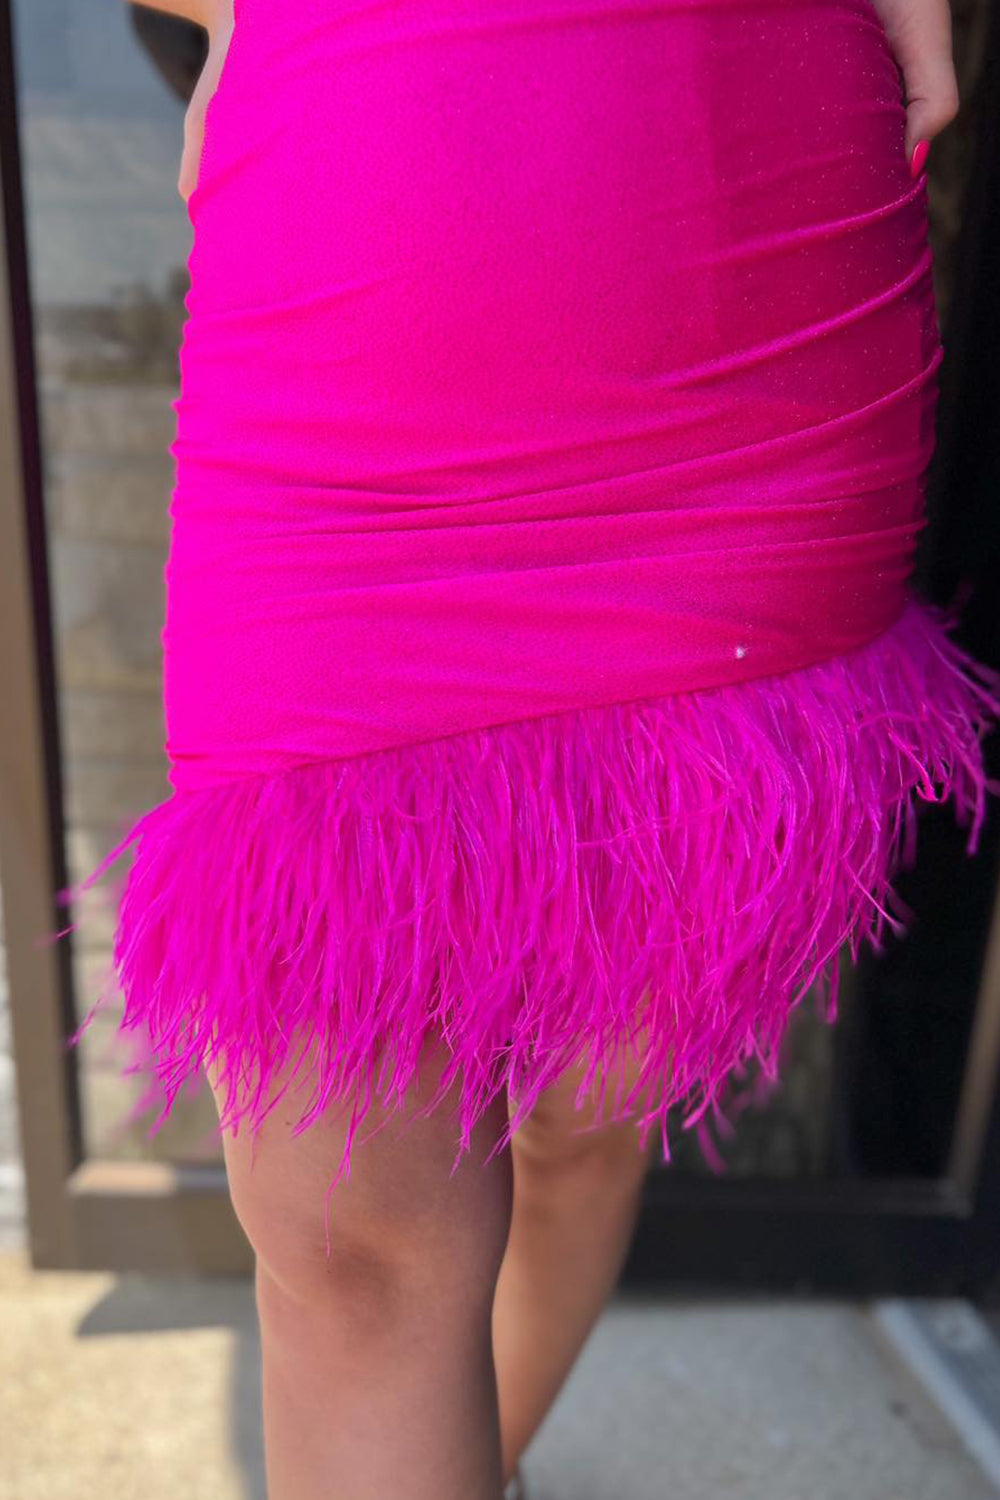 Cute Sheath Spaghetti Straps Hot Pink Short Homecoming Dress with Feather